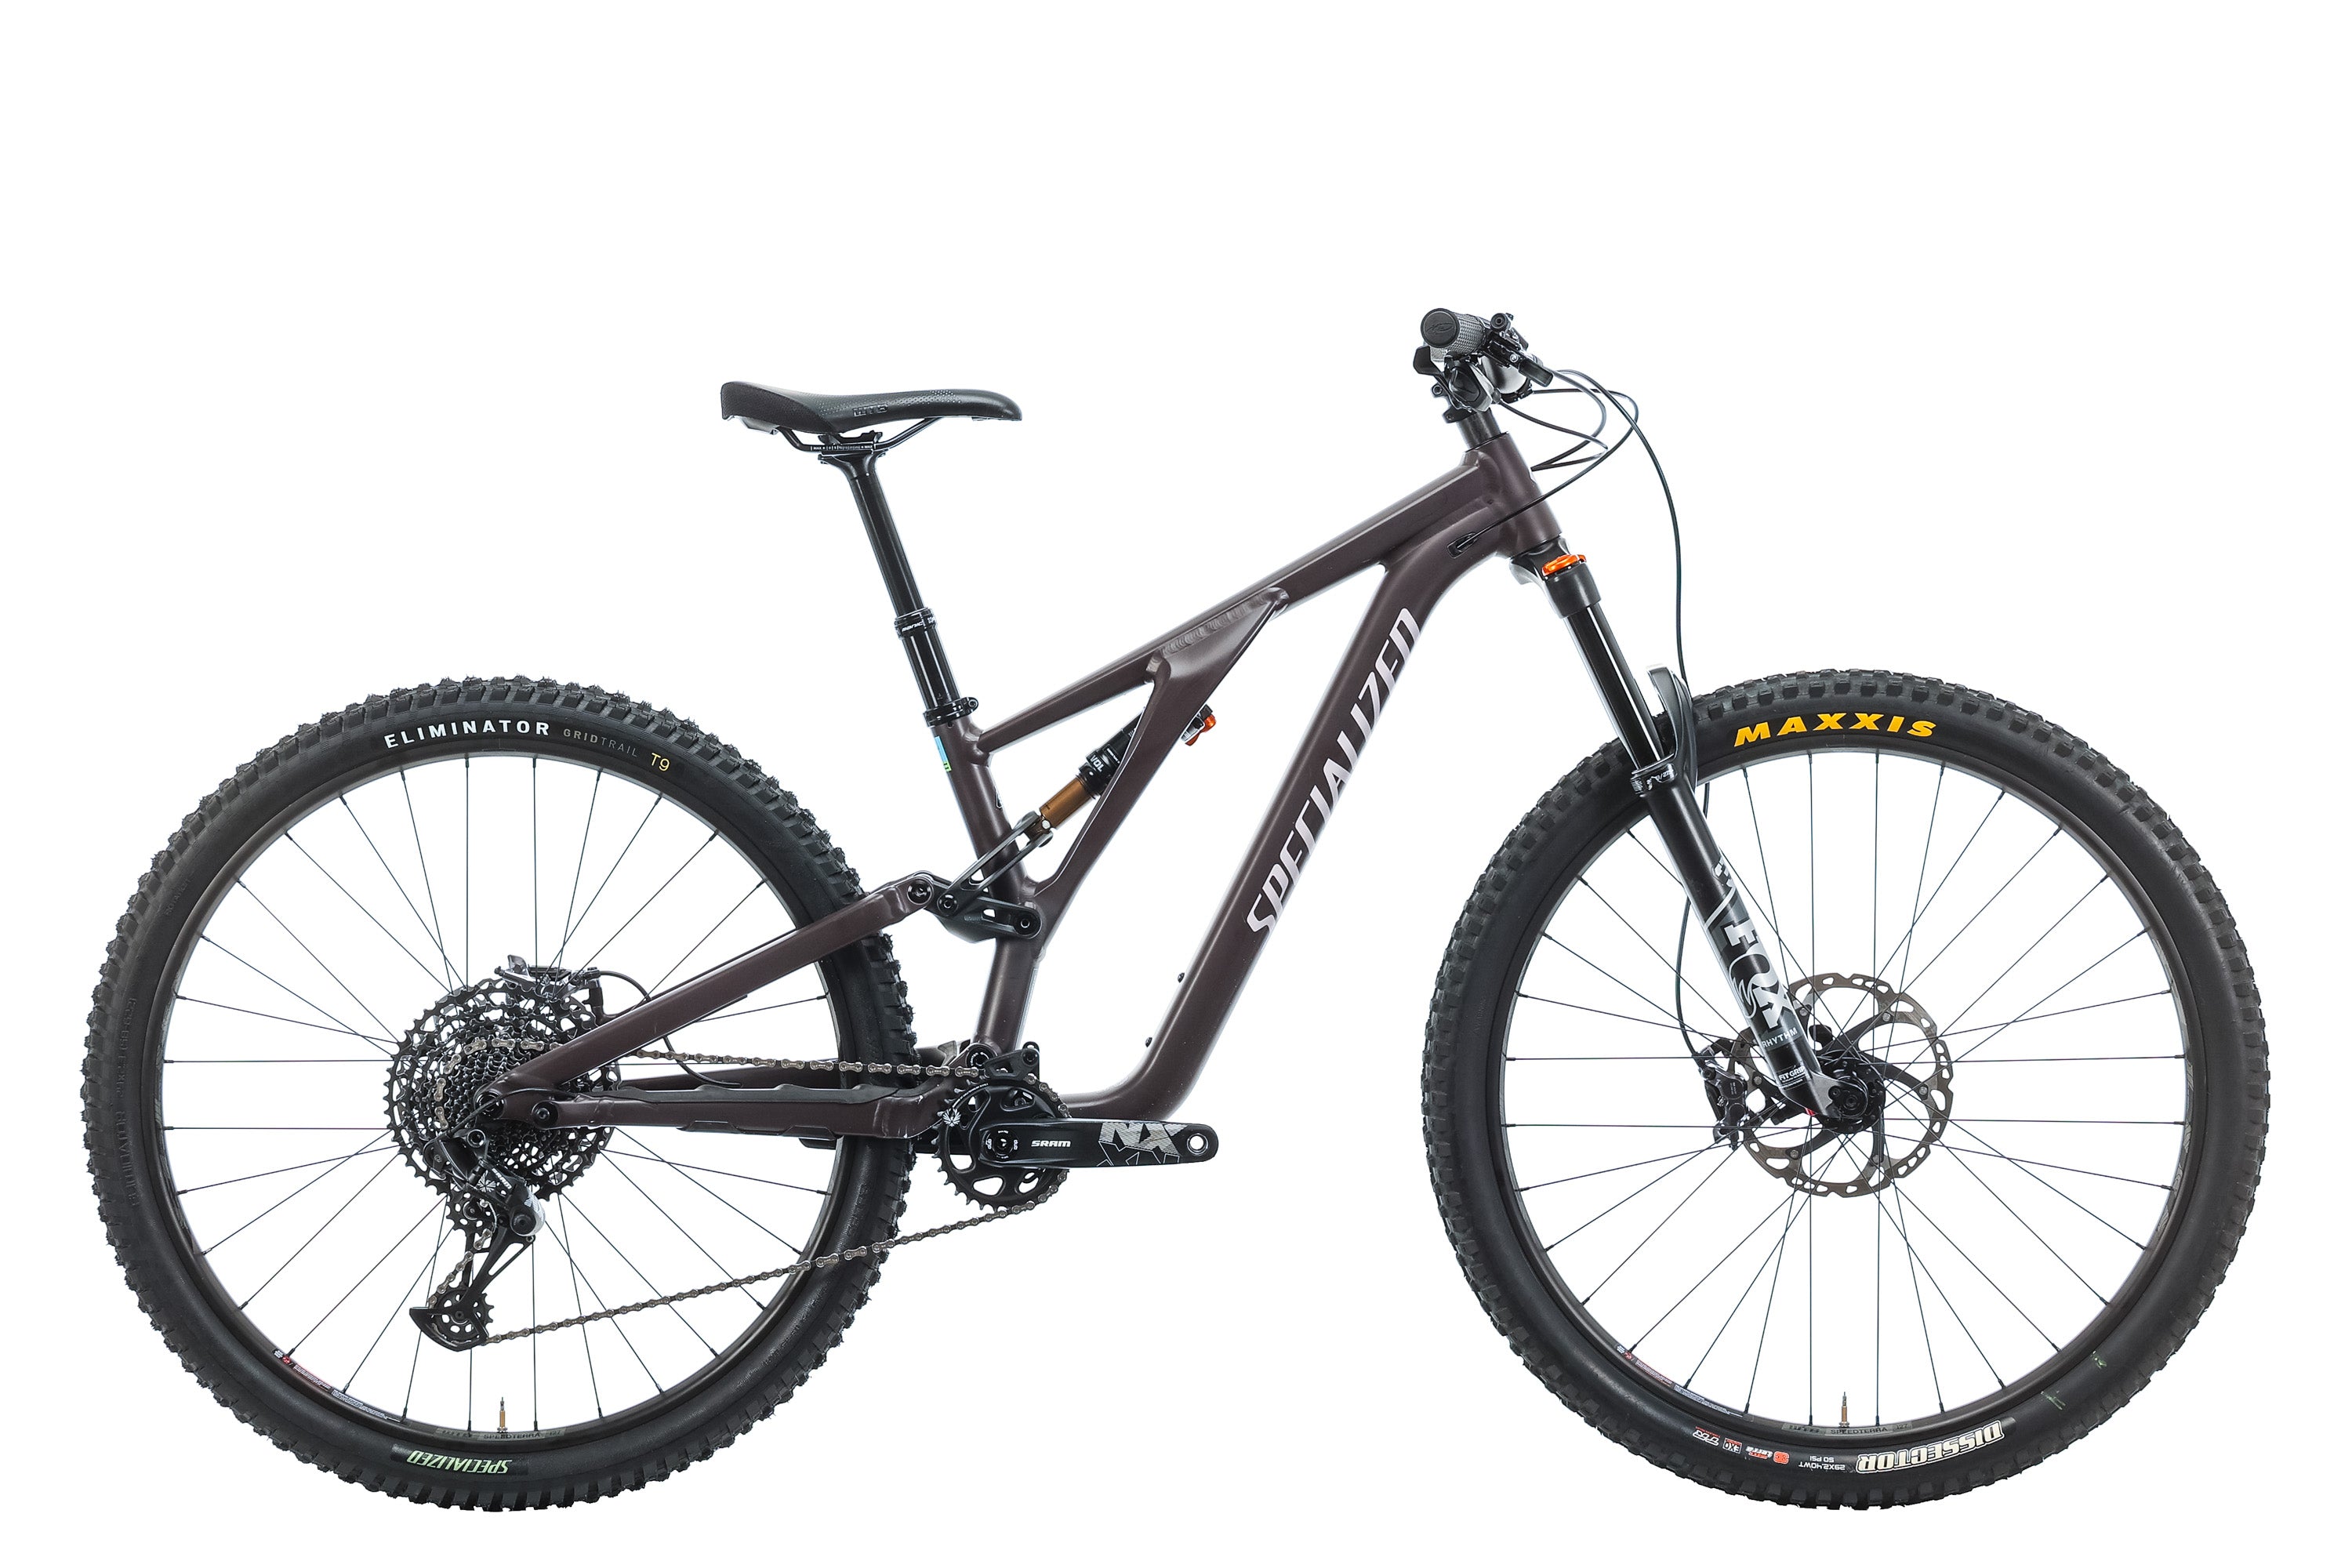 Specialized Stumpjumper Alloy Mountain Bike - 2021, S2 | The Pro's 